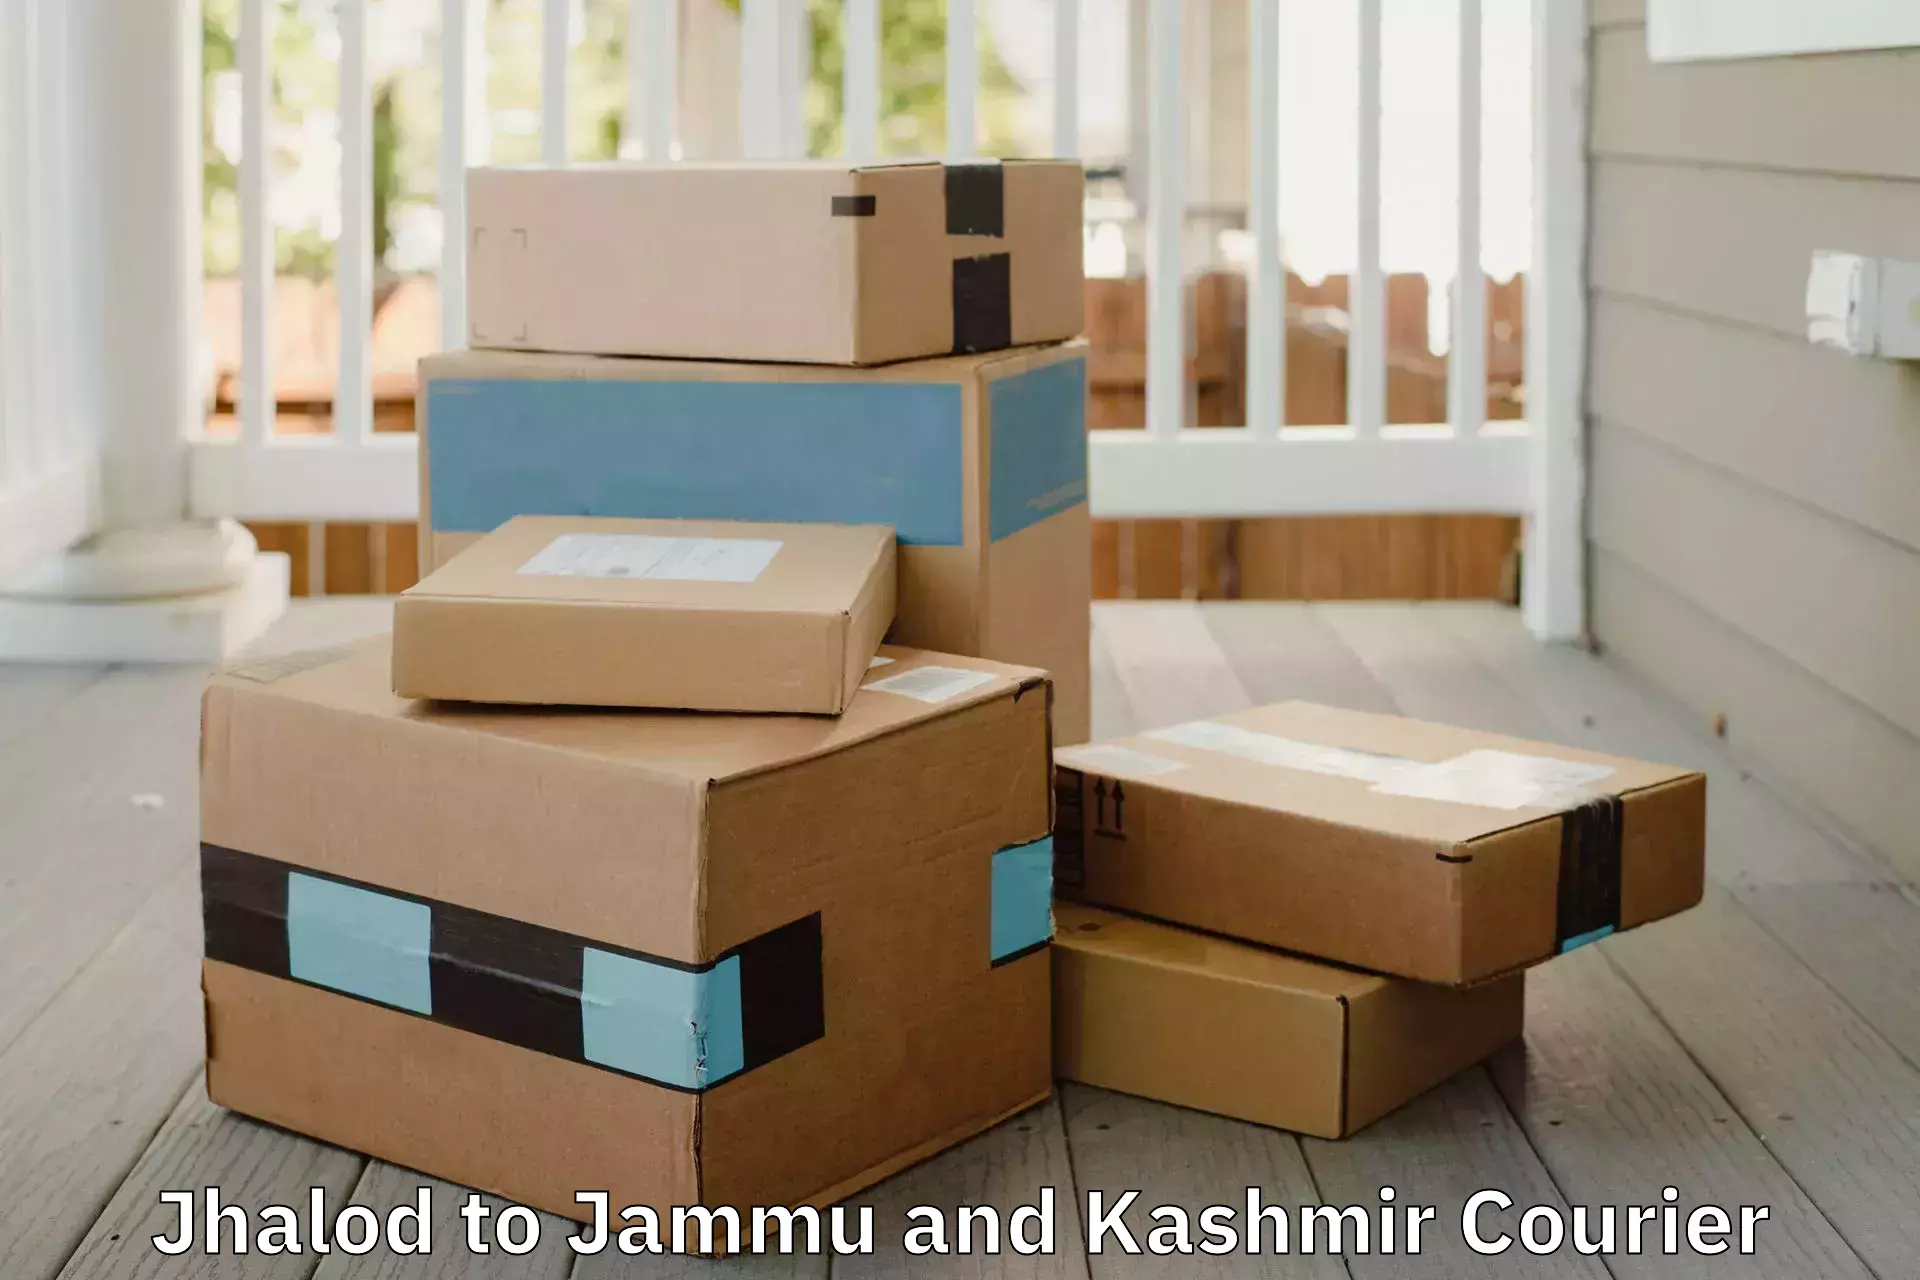 Professional moving company Jhalod to Udhampur